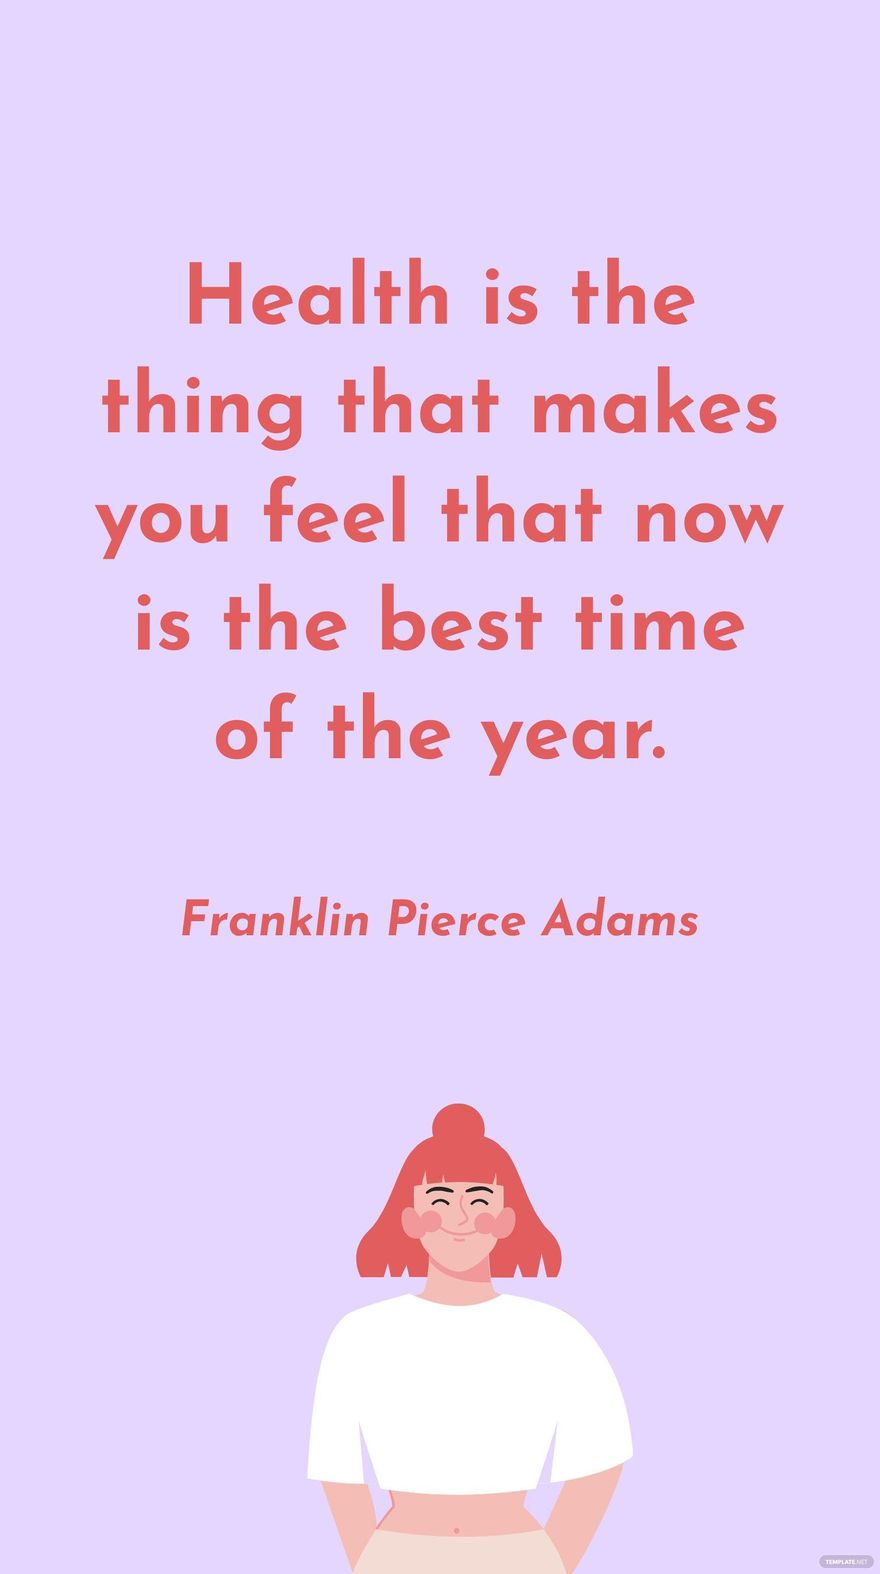 Franklin Pierce Adams - Health is the thing that makes you feel that now is the best time of the year. in JPG